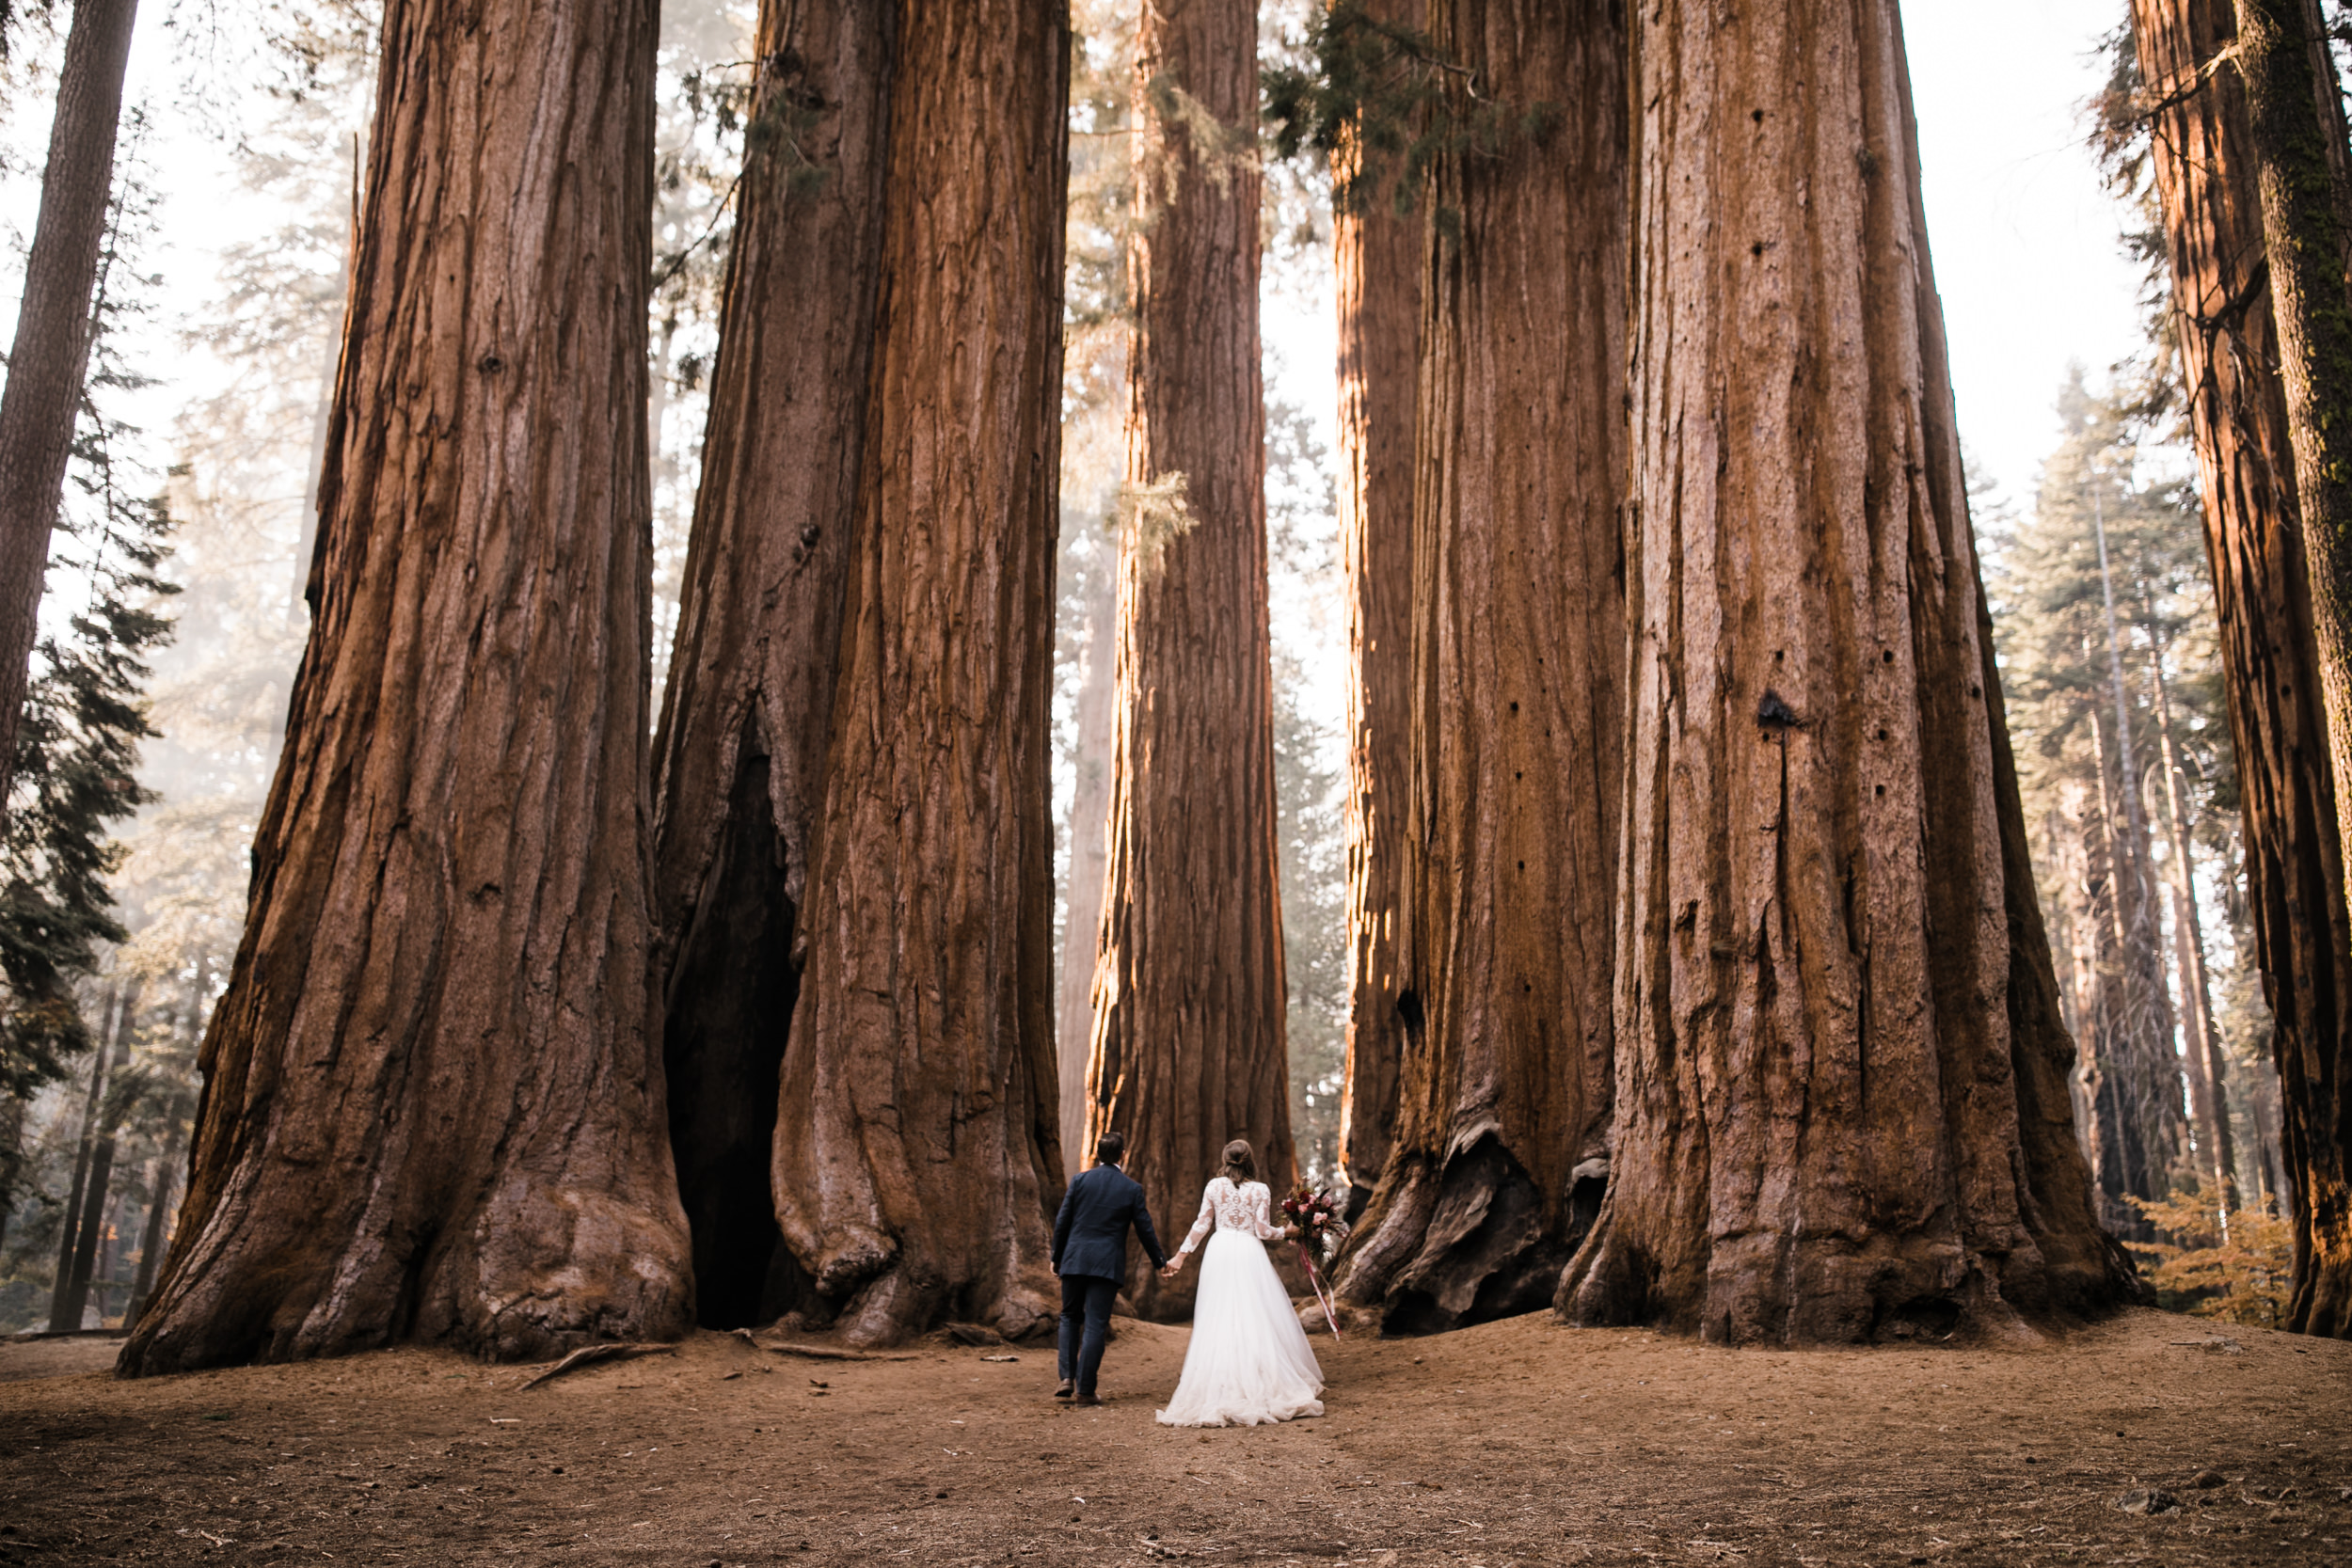 sequoia national park elopement wedding | adventure wedding in a forest | the hearnes adventure photography